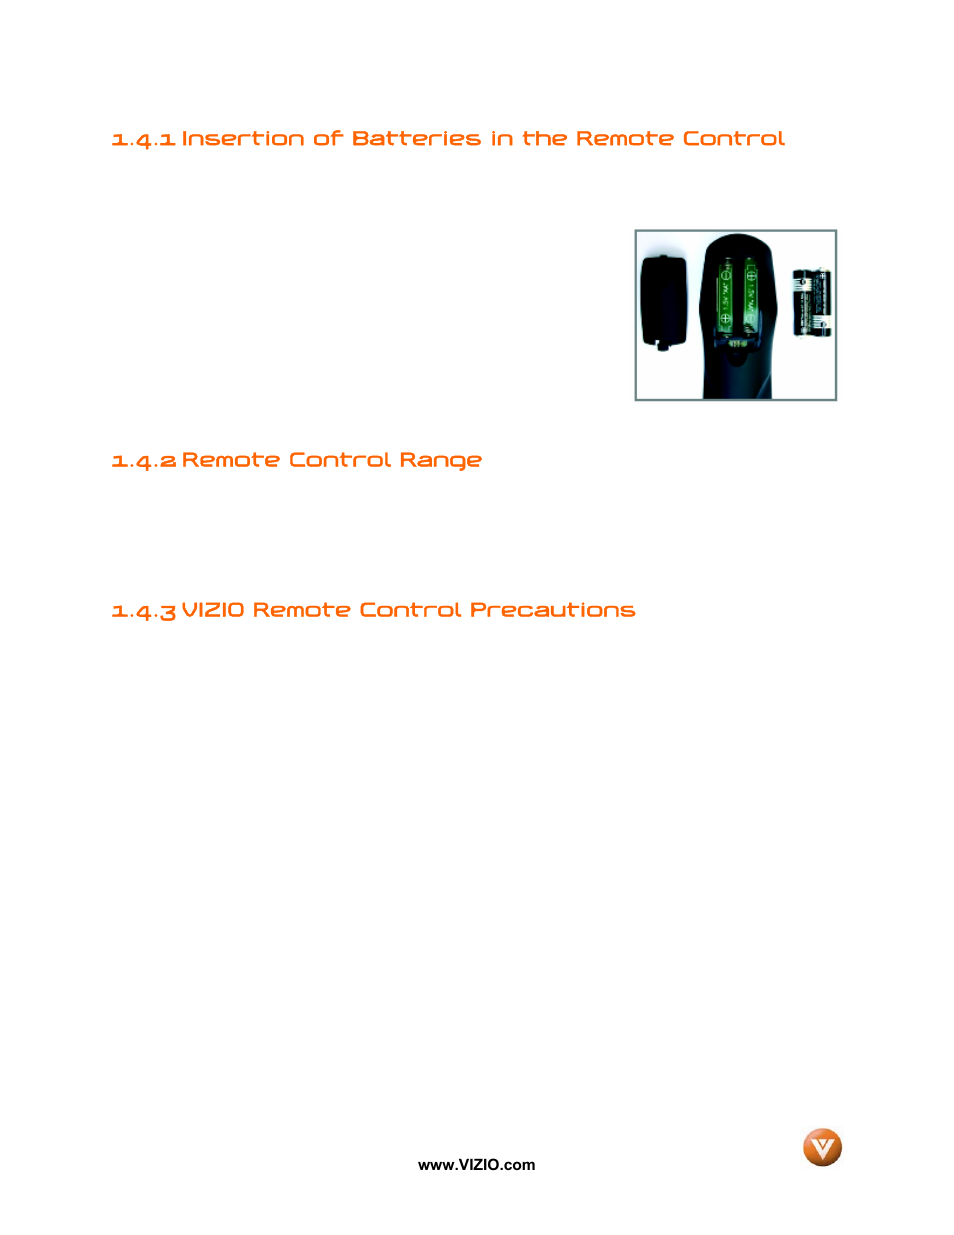 1 insertion of batteries in the remote control, 2 remote control range, 3 vizio remote control precautions | Vizio VP42 User Manual | Page 12 / 57